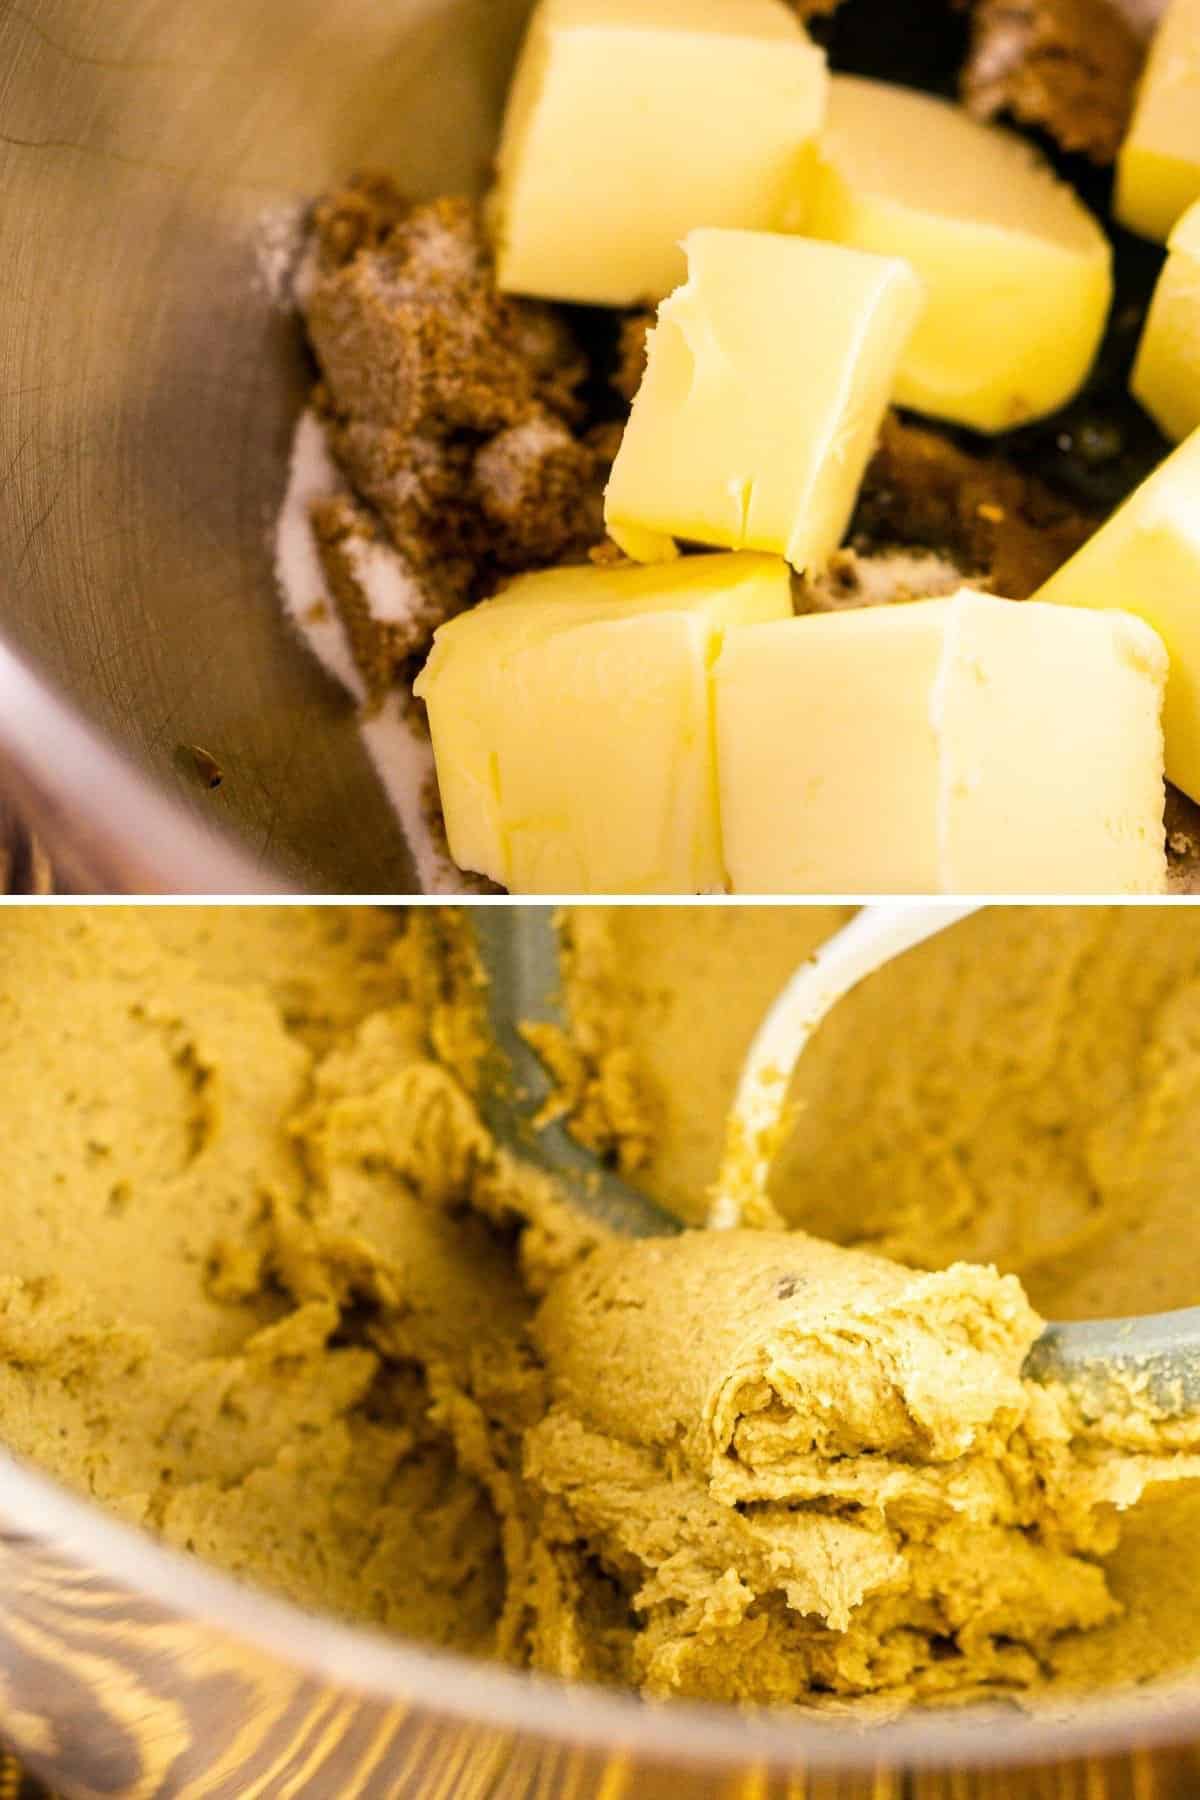 A collage showing the sugar and butter before creaming and then after creaming once light and fluffy.